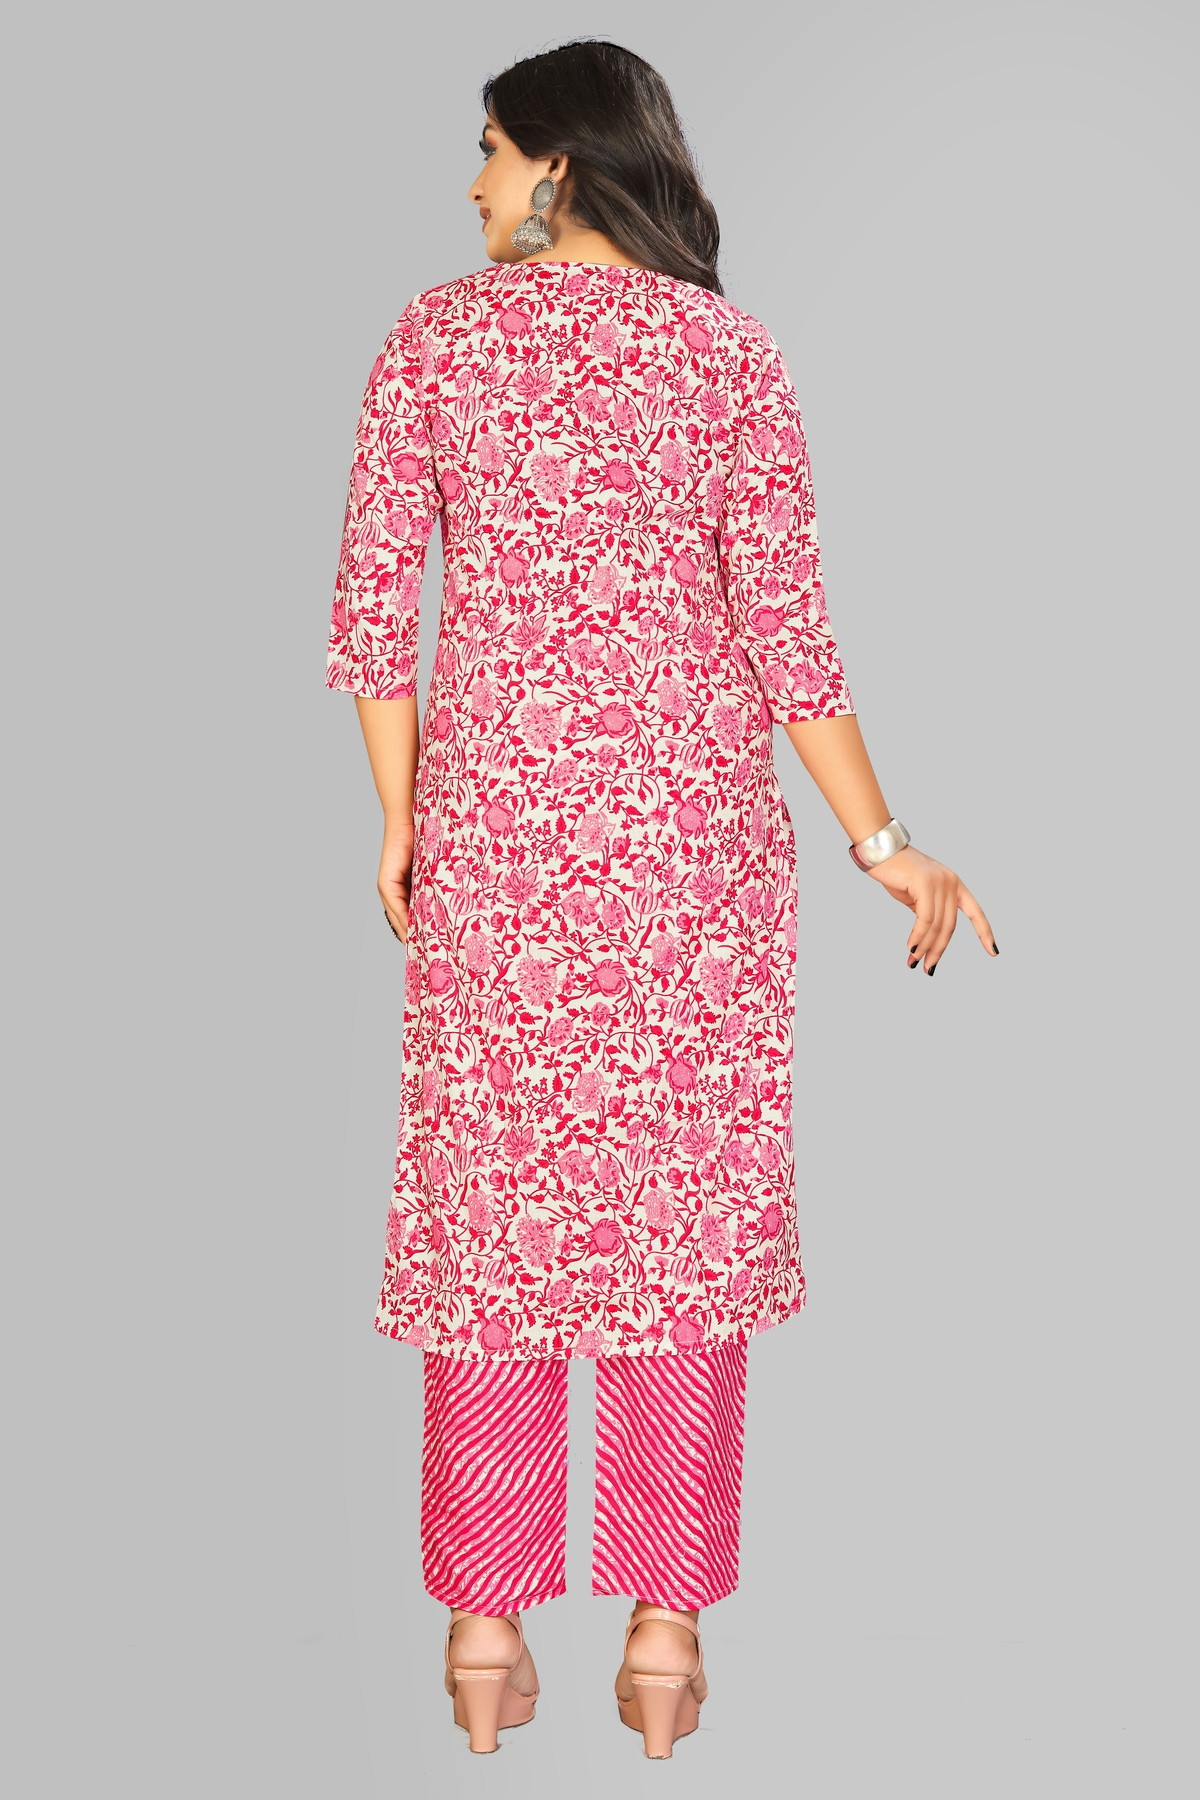 Aaritra Fashion Cotton floral printed Kurti with Pant - Pink